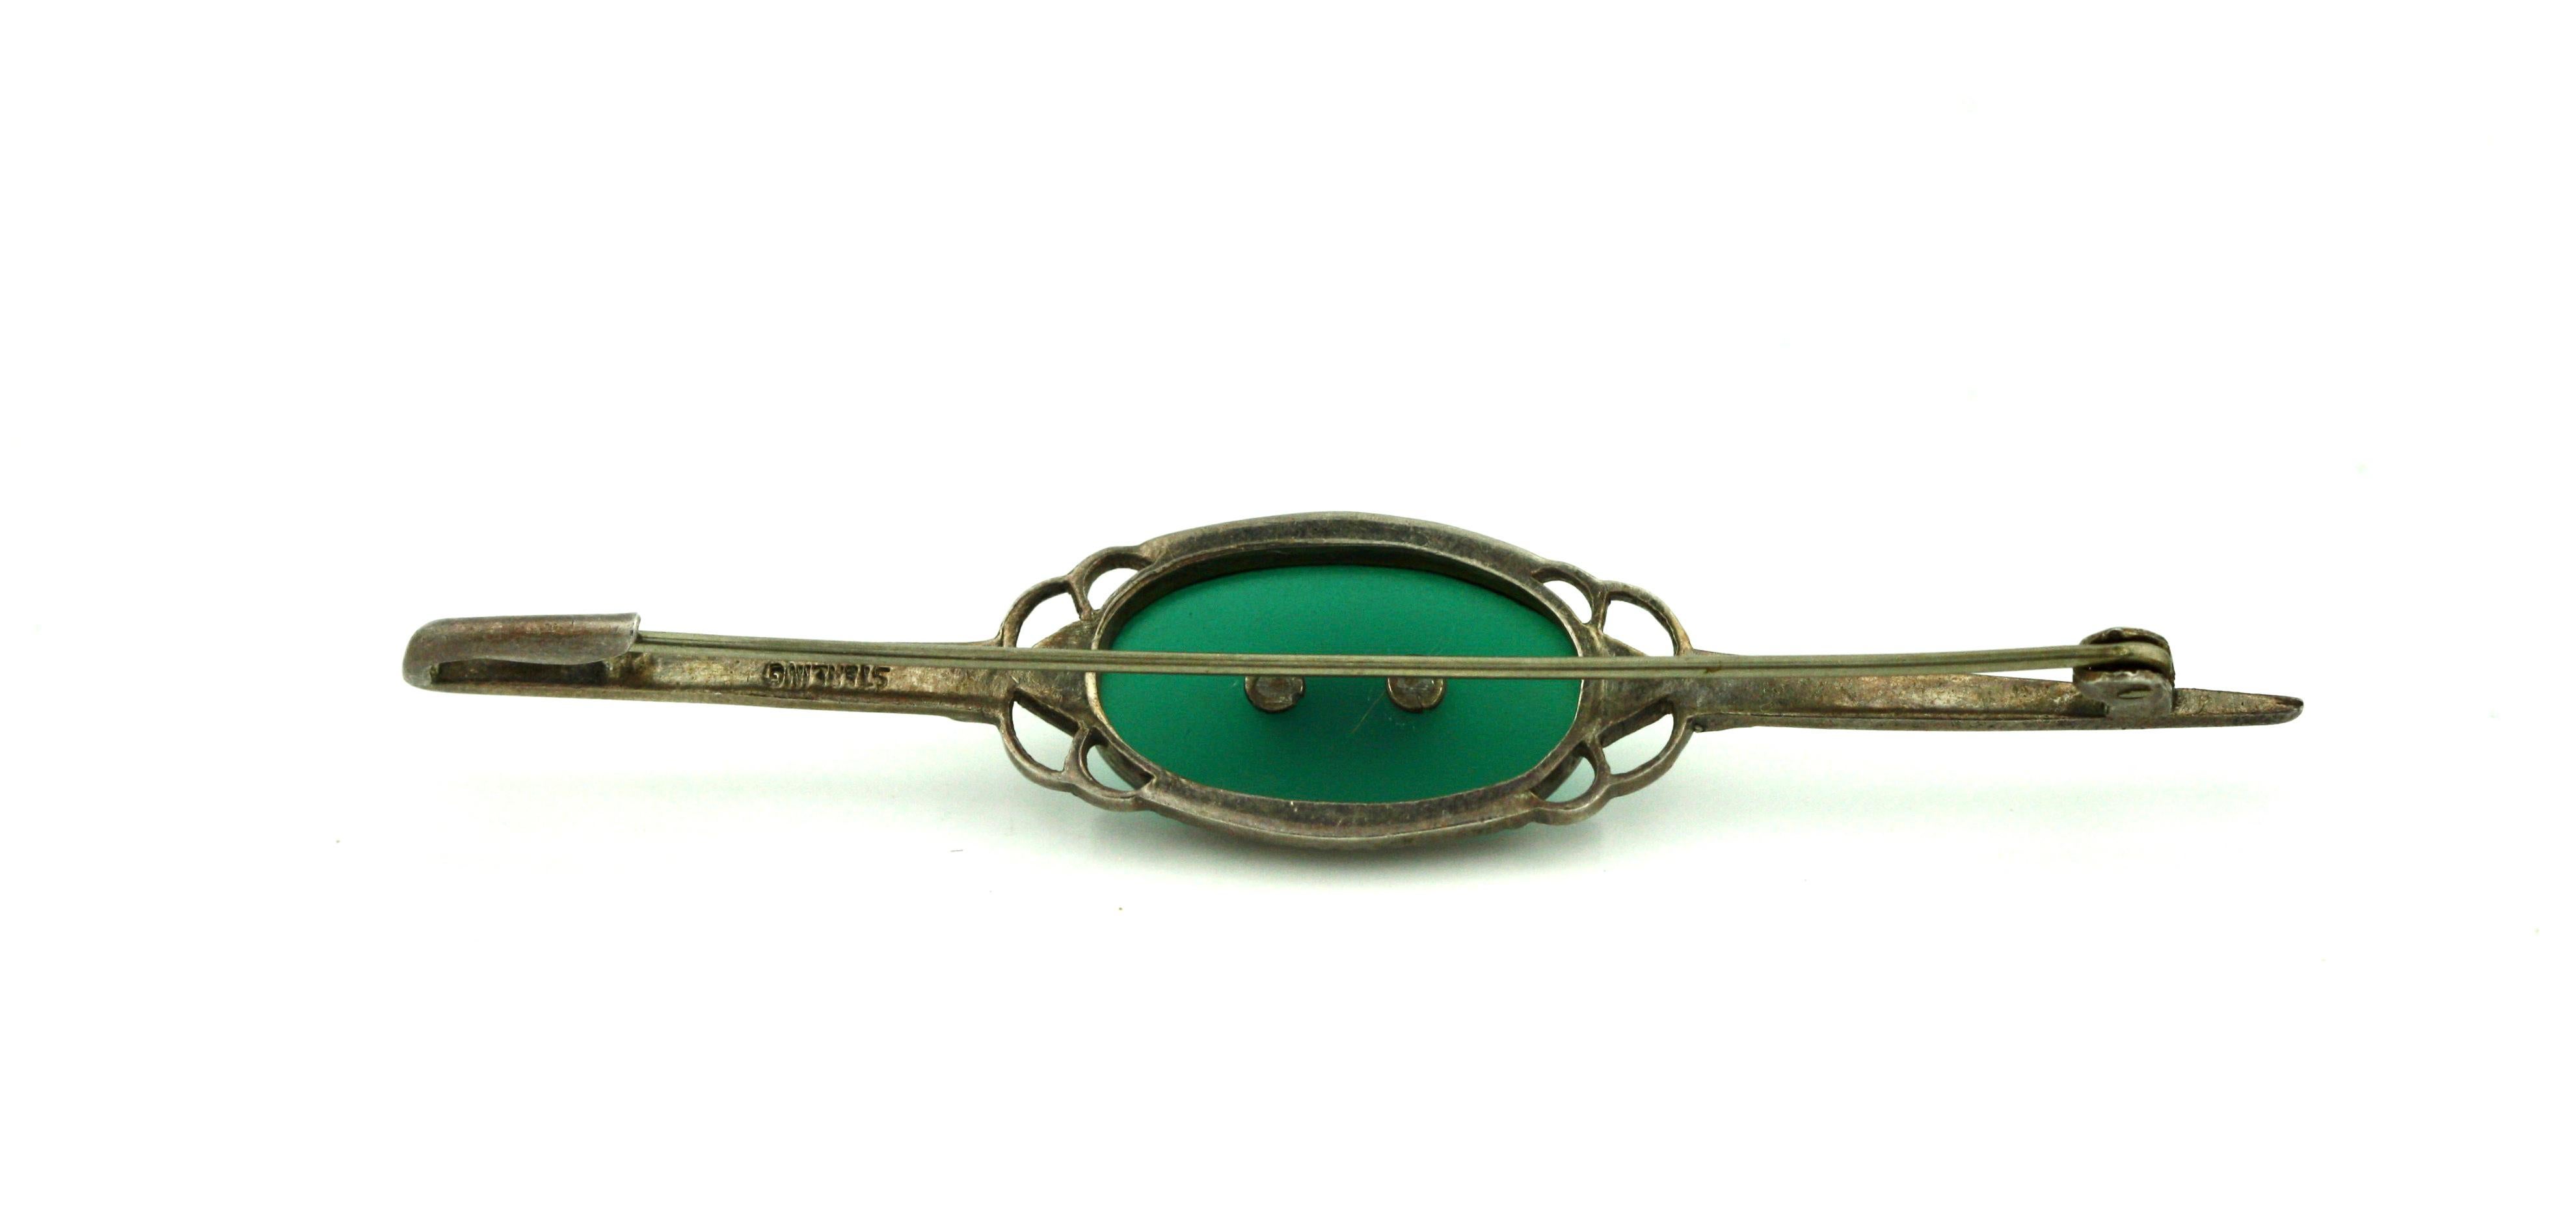 
A Silver and Colored Stone Brooch
Art Deco Style Pin / Brooch, 3 in. overall length
gross weight 5.2 grams
marked STERLING